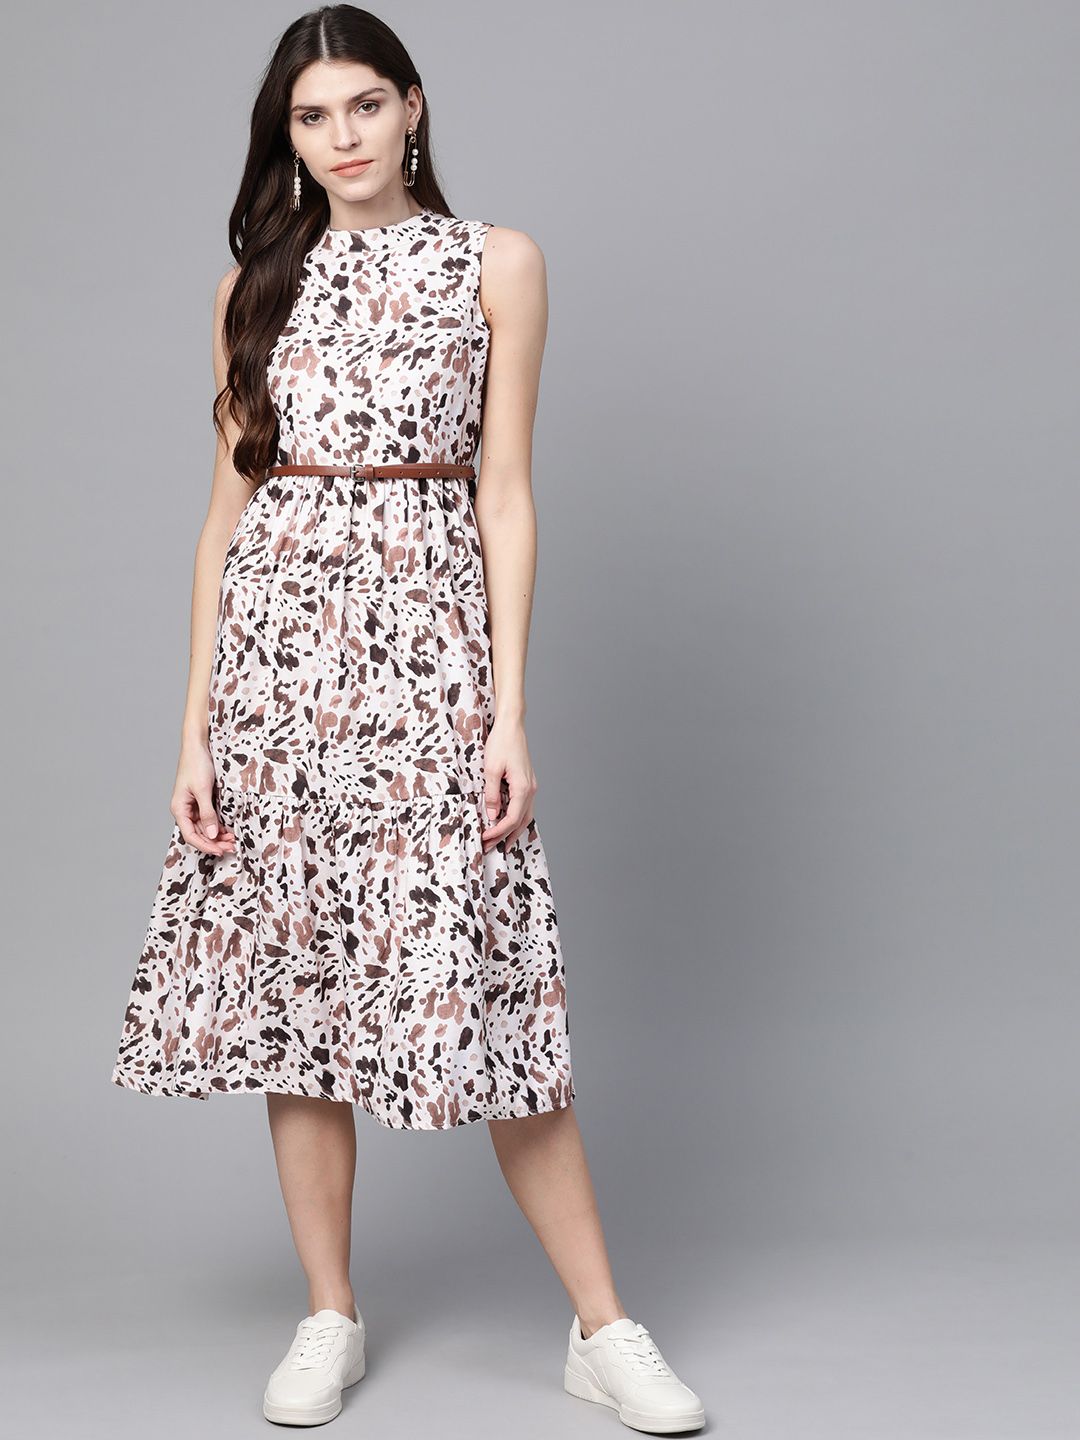 SASSAFRAS Off-White & Brown Leopard Printed A-Line Dress With Belt Price in India